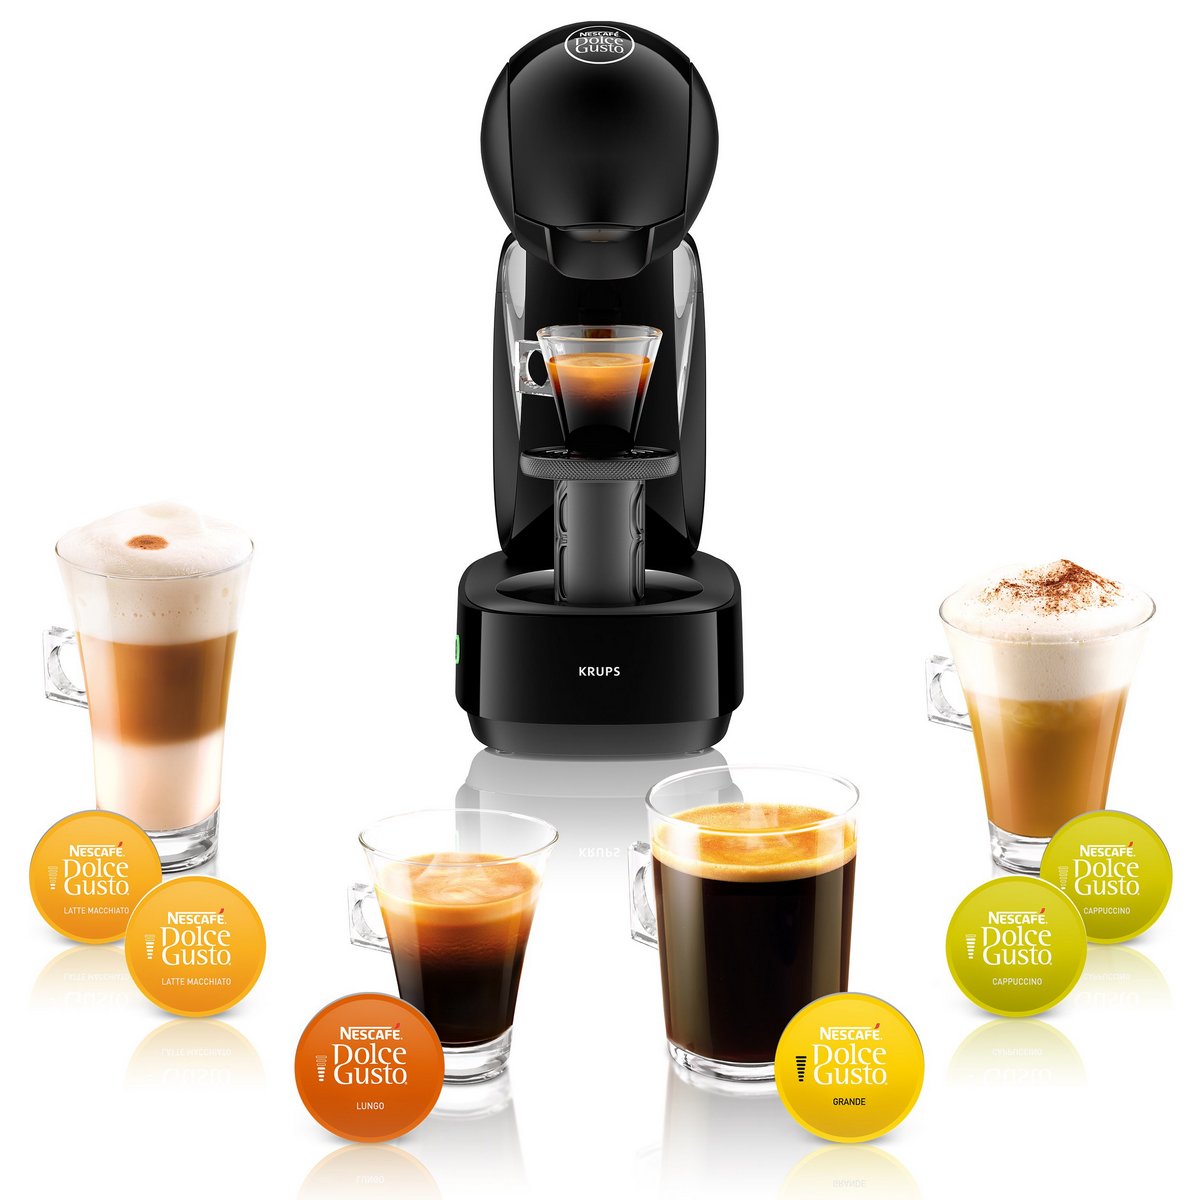 KRUPS NESCAFE DOLCE GUSTO INFINISSIMA KP 170831 CIERNY + darček NESCAFE DOLCE GUSTO RISTRETTO BARISTA 48KS ECONOMY PACK